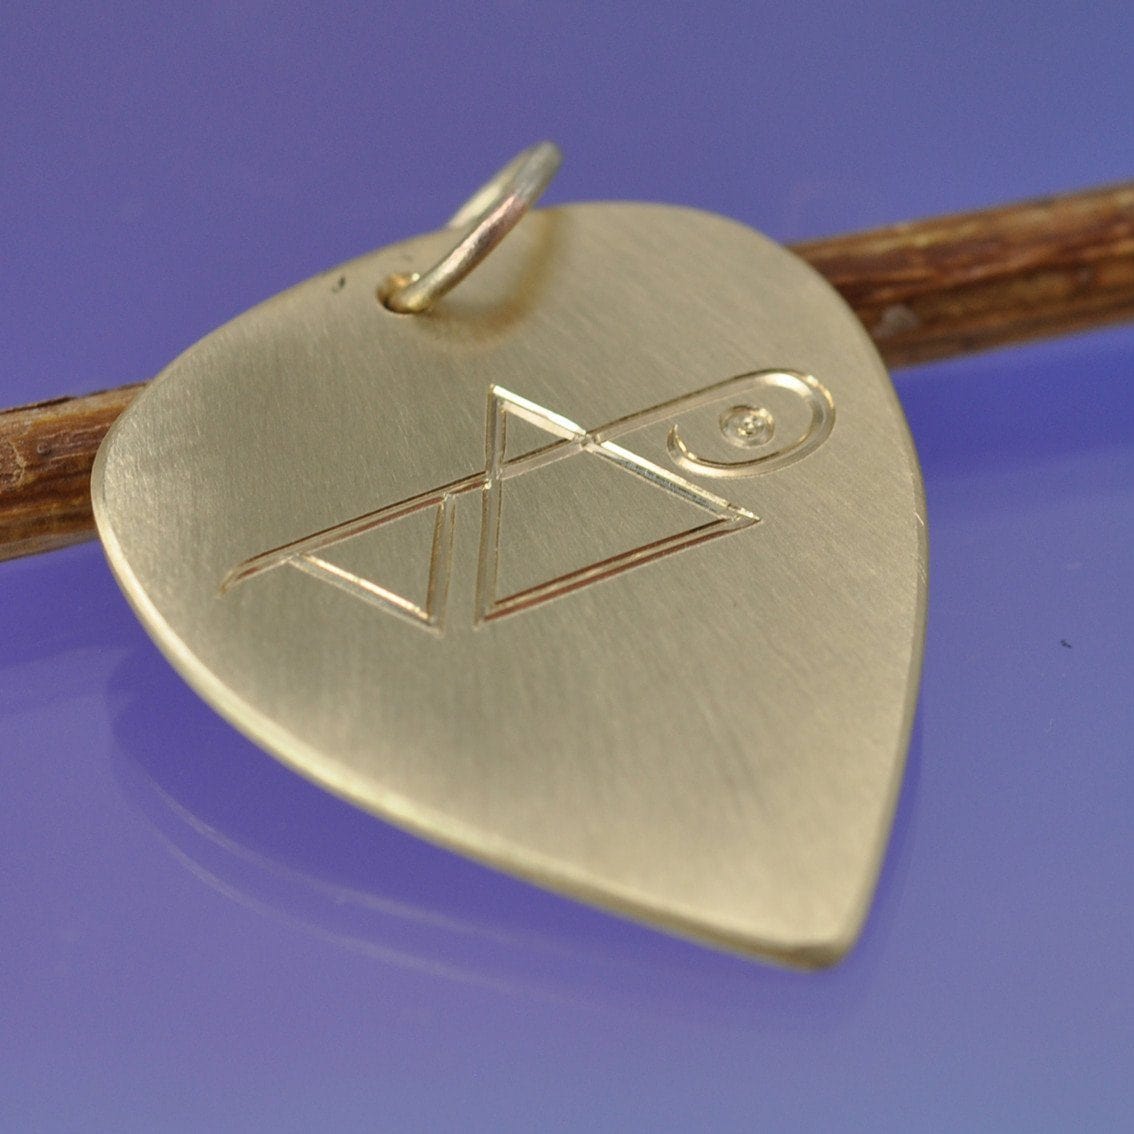 Guitar Plectrum - Your Hand Writing Silverware by Chris Parry Jewellery